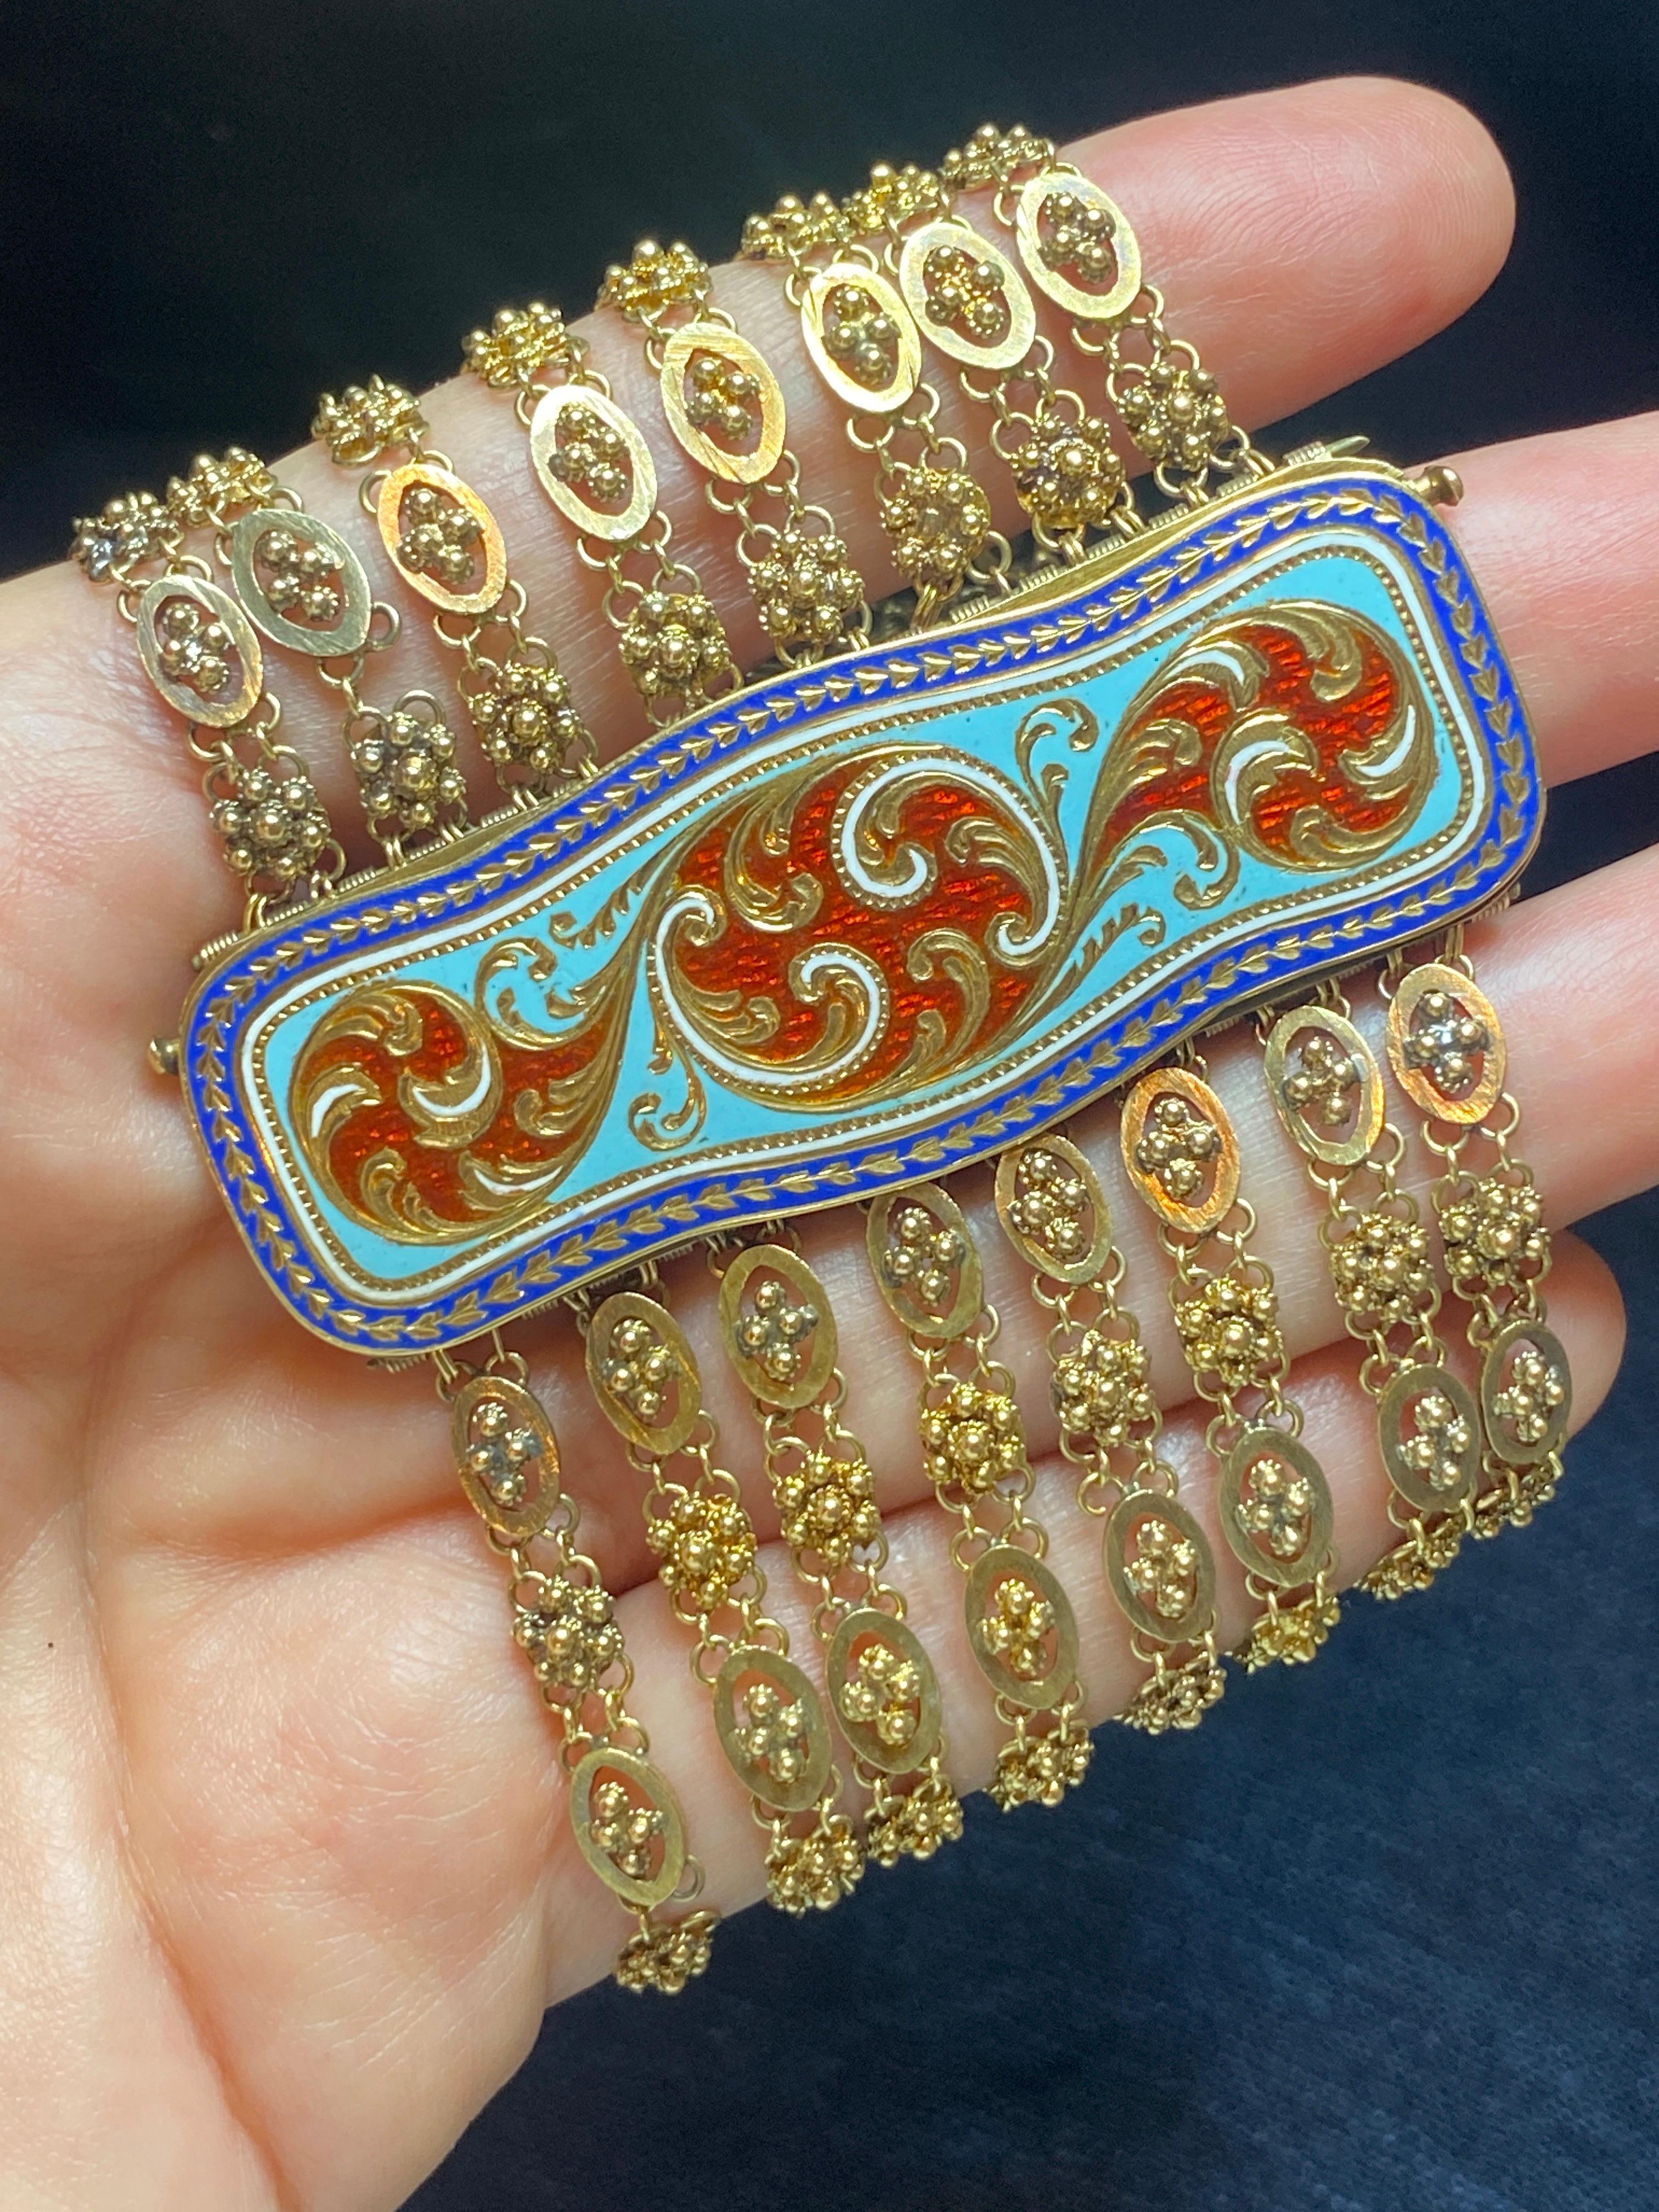 This unique 1920s English 18 carat gold bracelet consists of 8 delicate filigree chains. The buckle is a flawless example of engraved enamel. Beautifully made, it is a striking piece and very comfortable to wear.